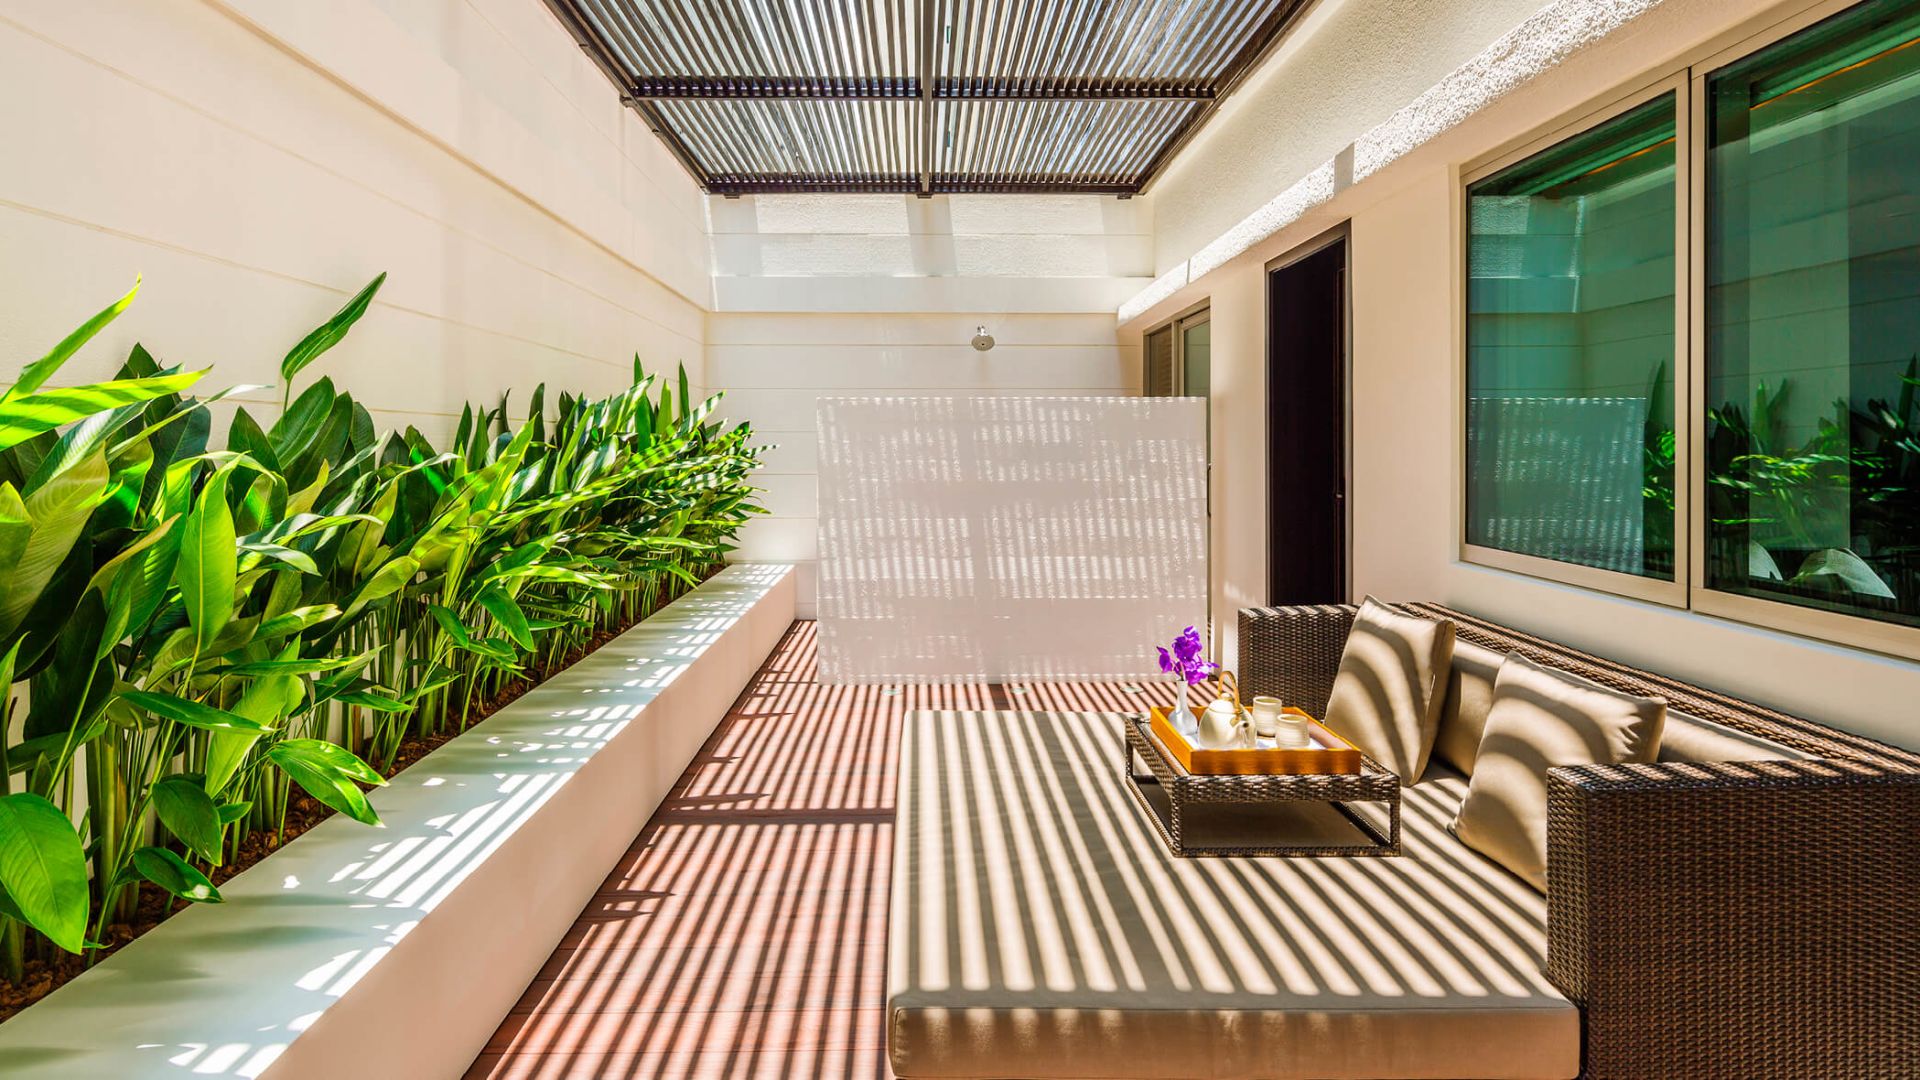 Private outdoor terrace with outdoor shower - Image